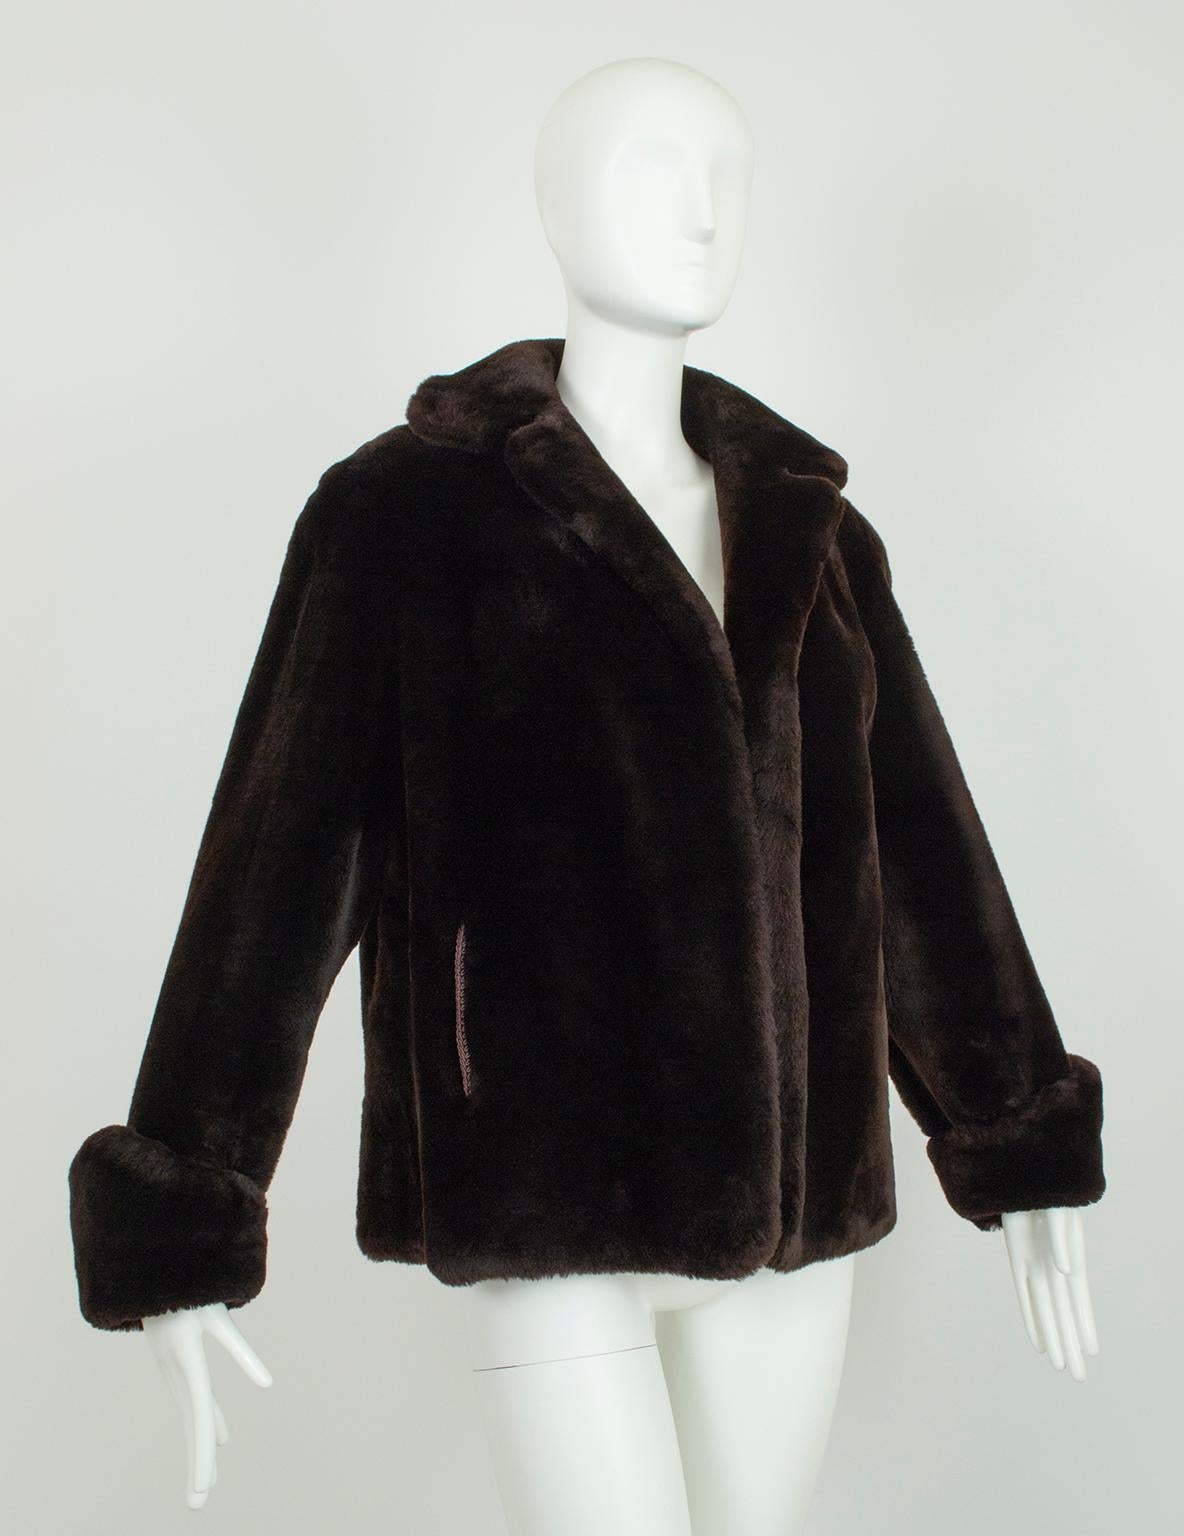 Built for frigid winters and as plush and comforting as a teddy bear, this mouton swing jacket features a saturated deep brown color with the slightest hint of silky sheen. In a rare and wearable larger size its voluminous sweep would look heavenly